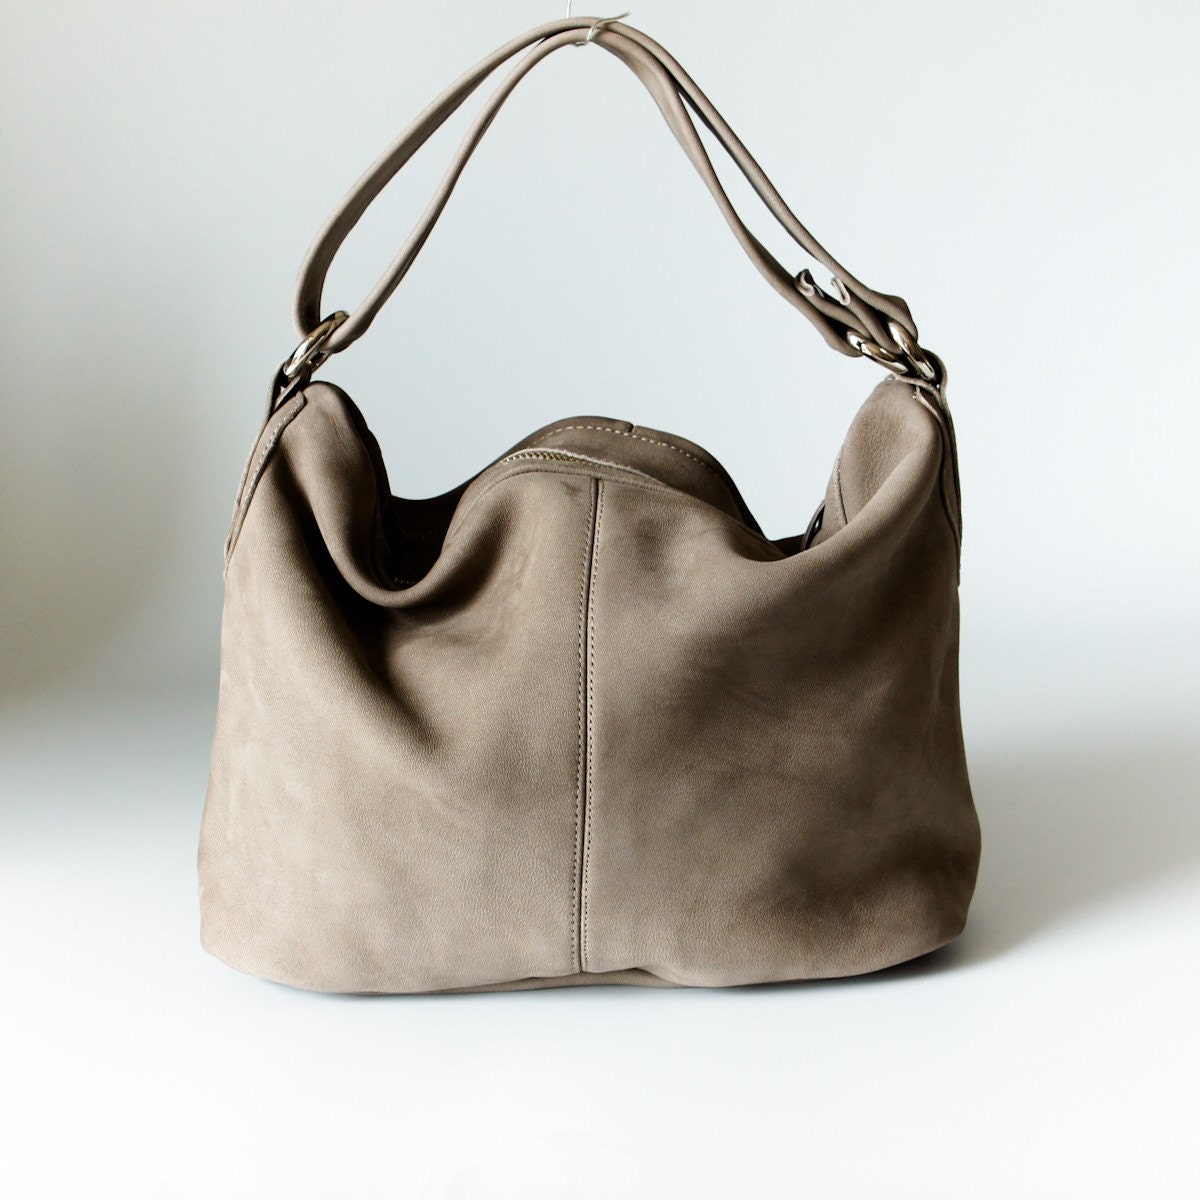 Lambskin Slouch Handbag in Buttery Soft Light Taupe by ribandhull